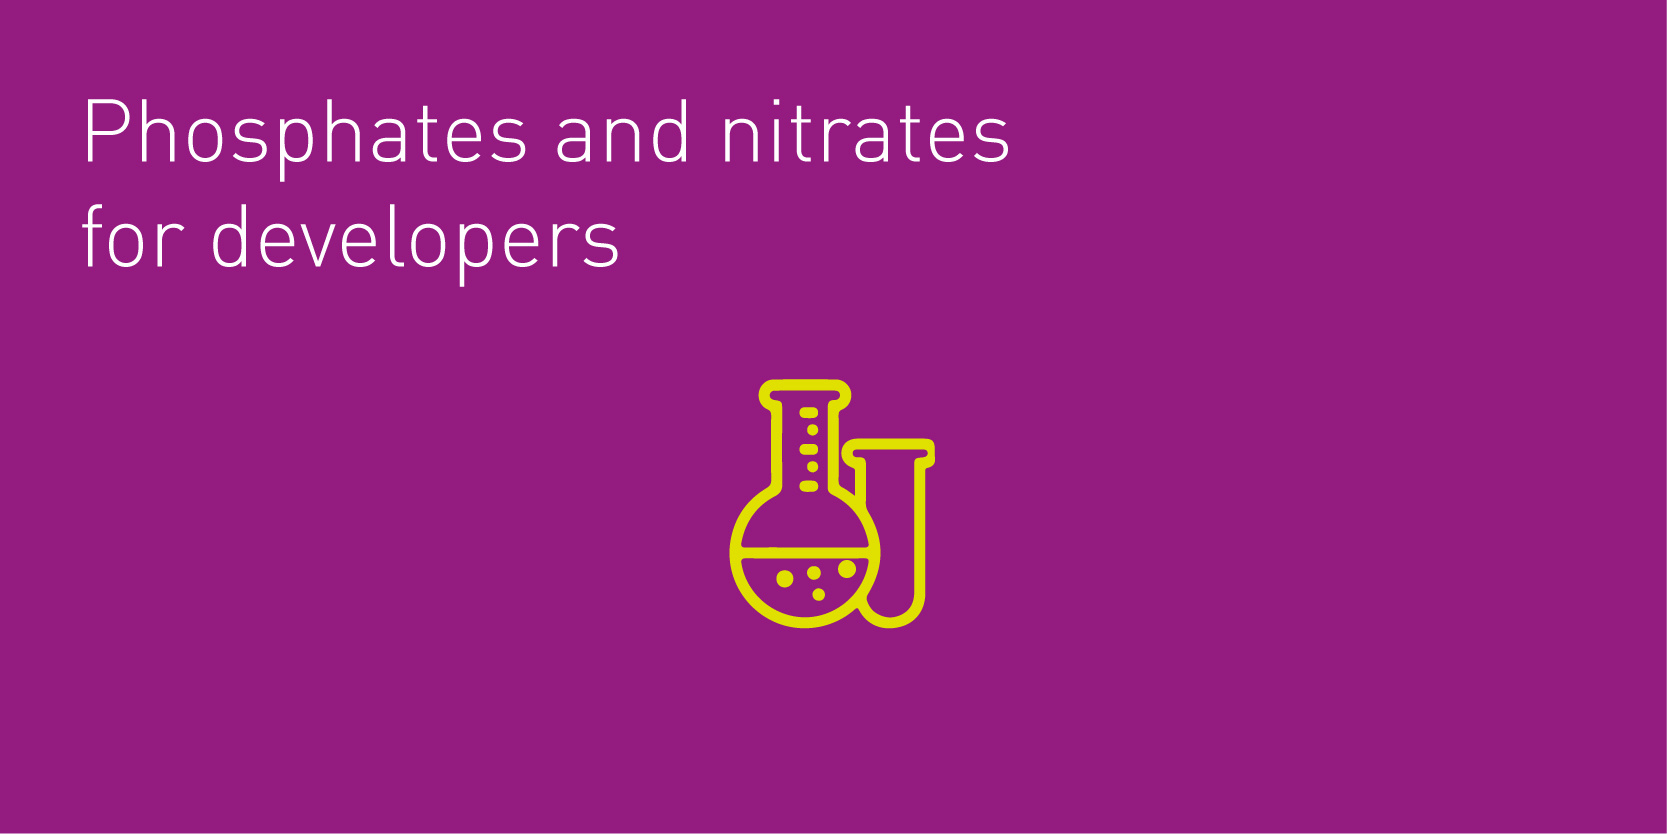 phosphates and nitrates